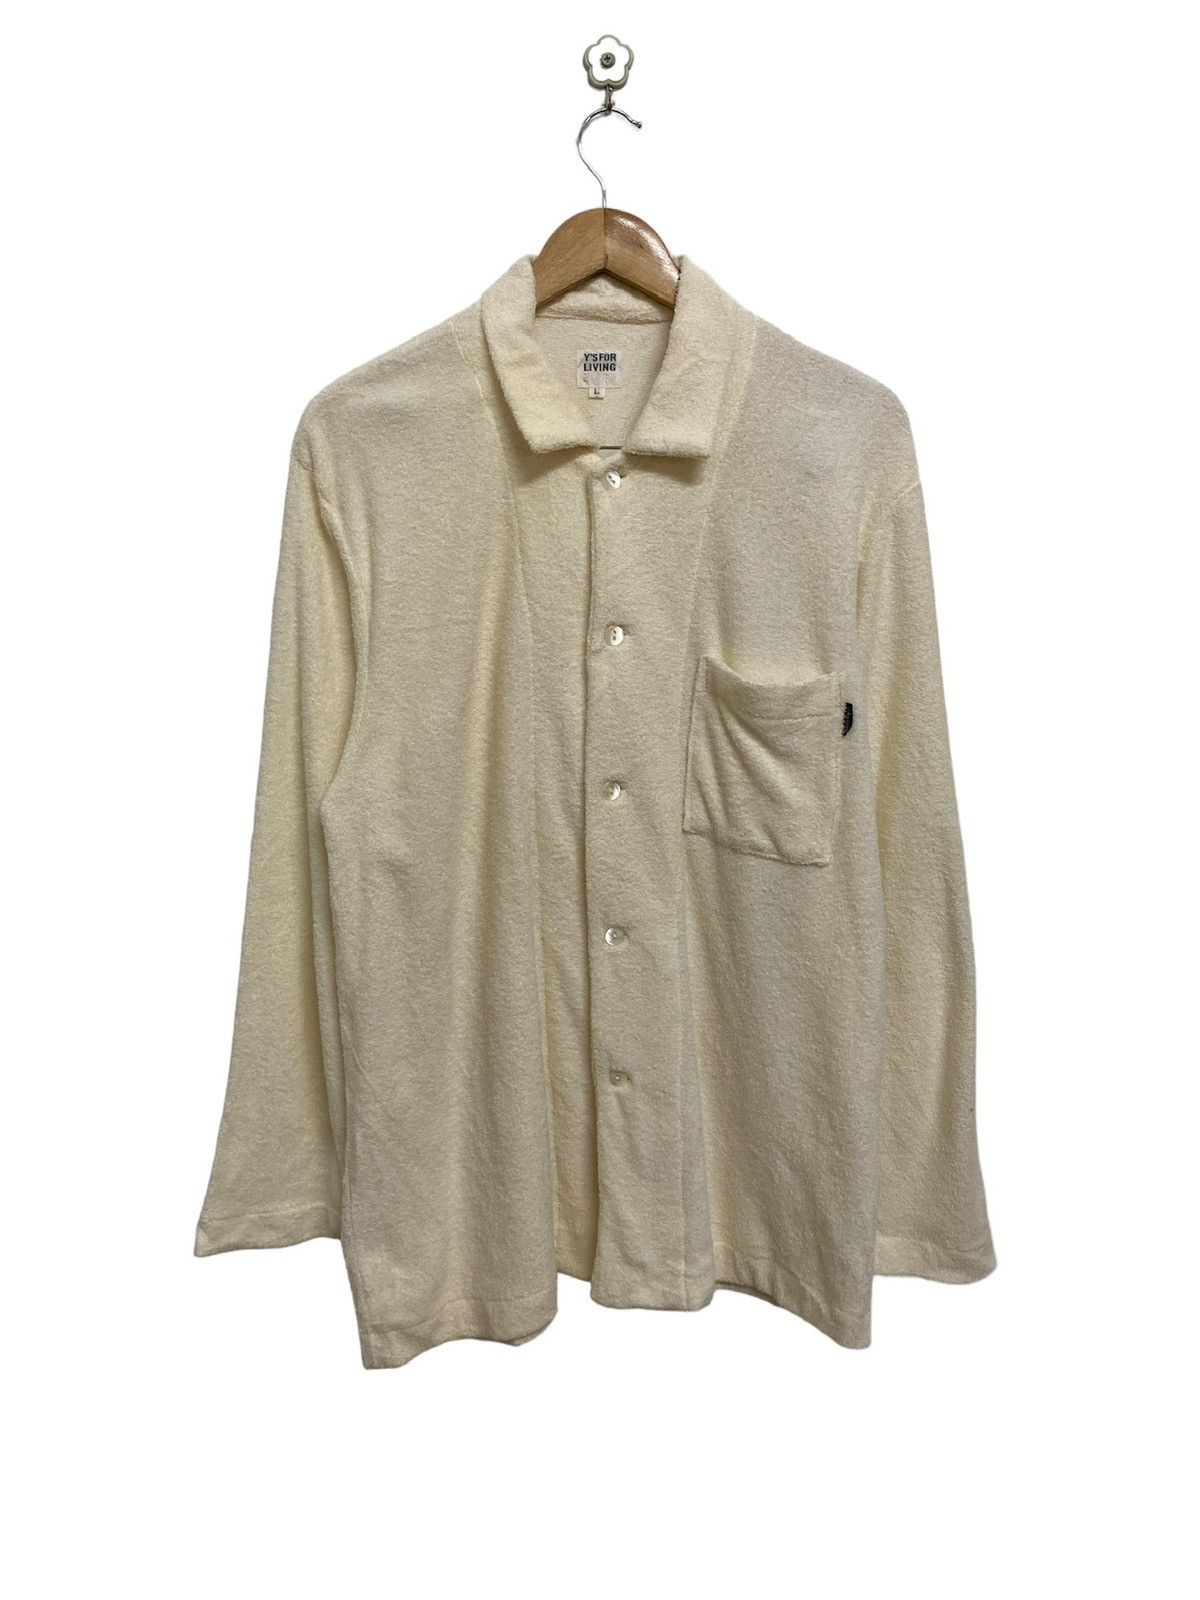 Y's For Living Yohji Yamamoto Button Up Japan Made - 1